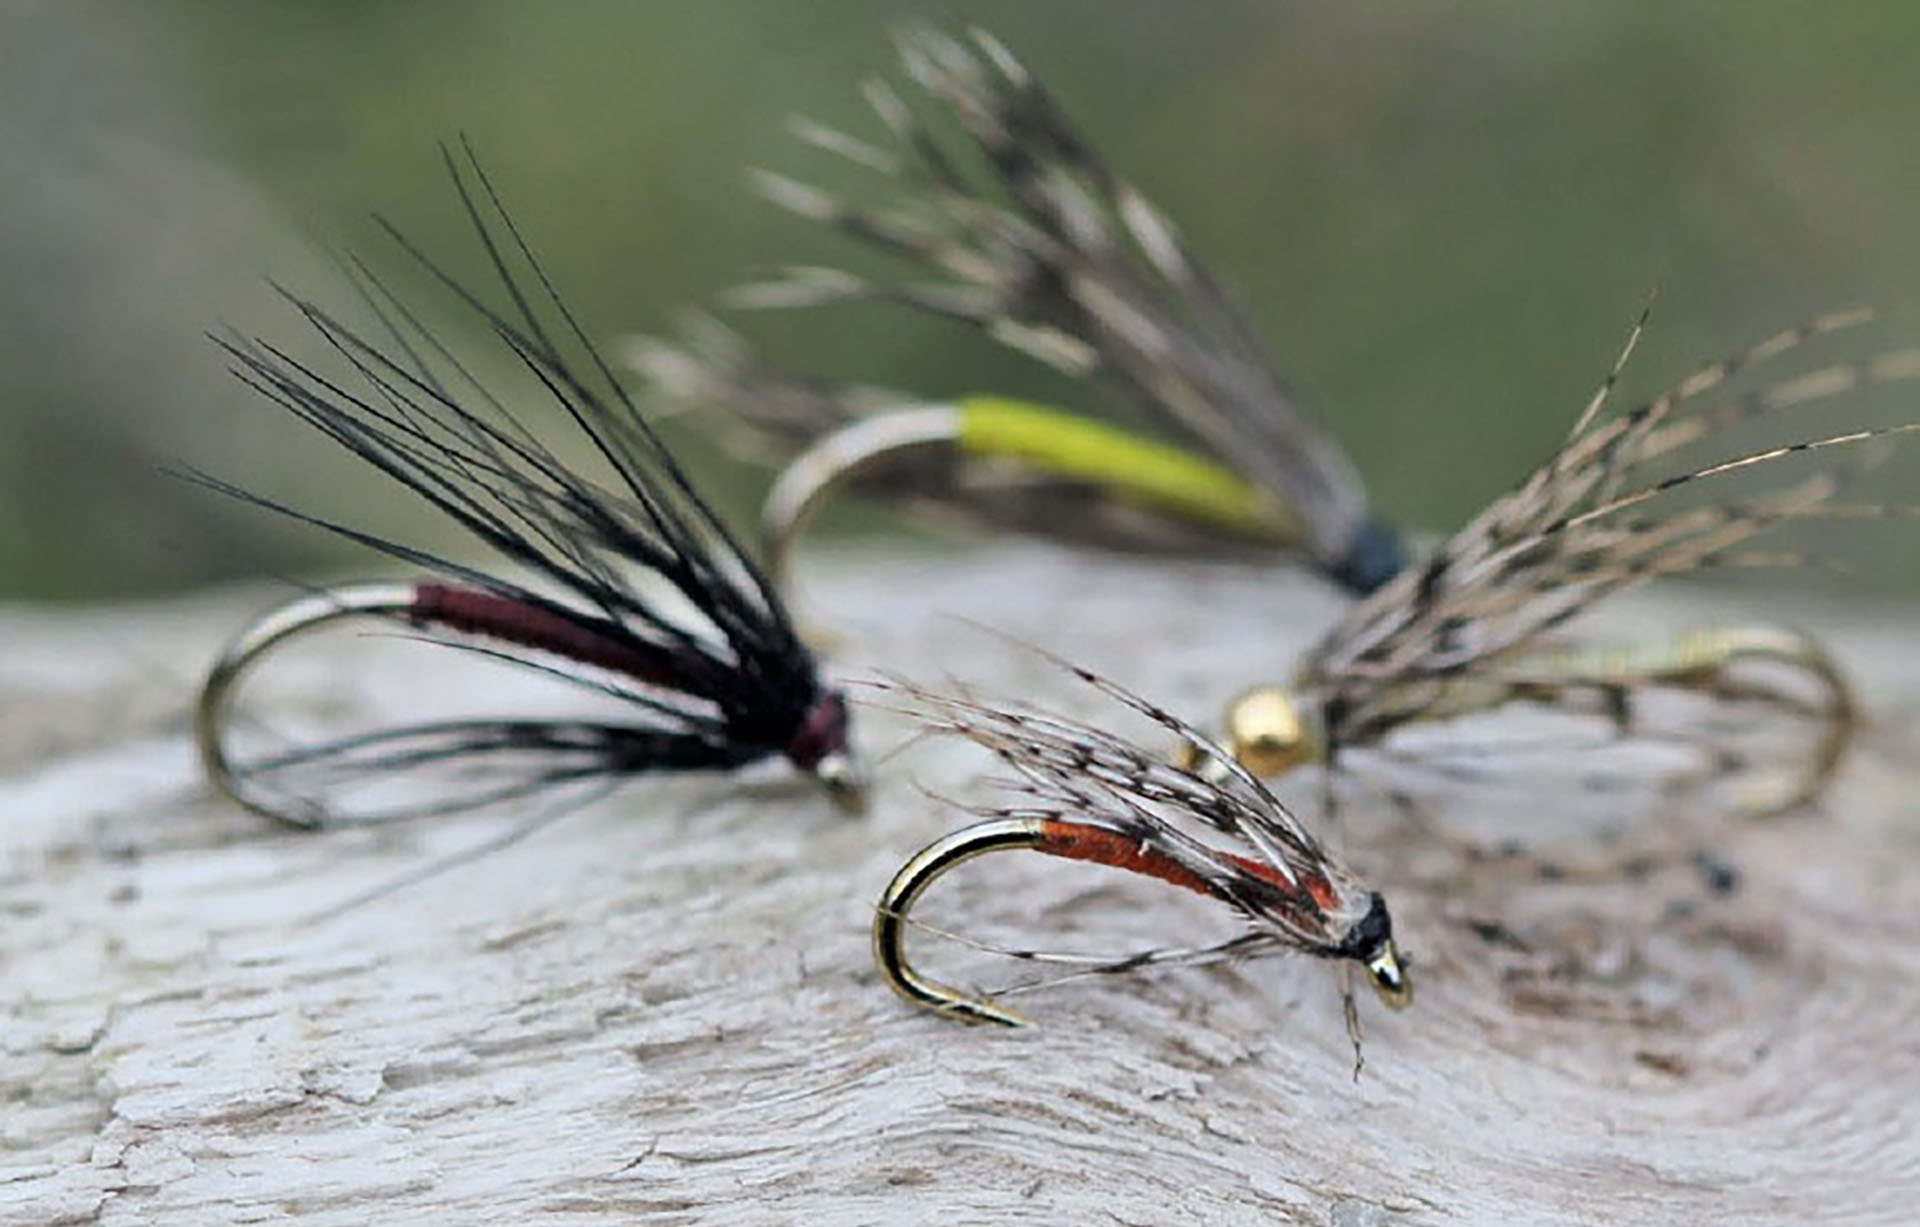 Beetle Spins still got it! - Wire Baits -  - Tackle  Building Forums